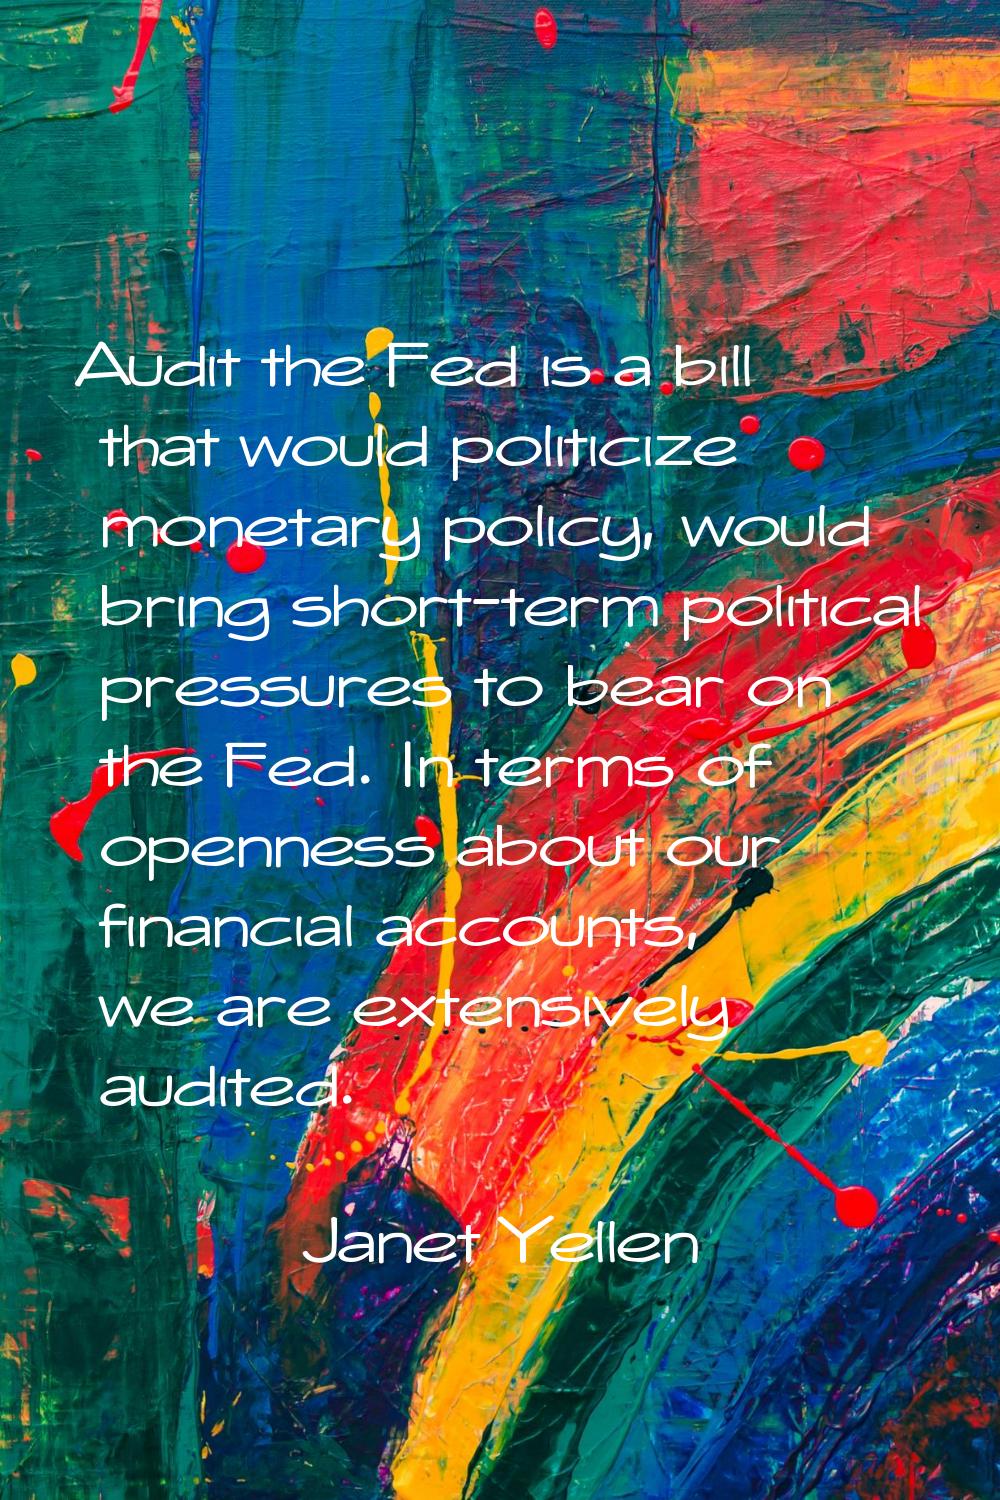 Audit the Fed is a bill that would politicize monetary policy, would bring short-term political pre